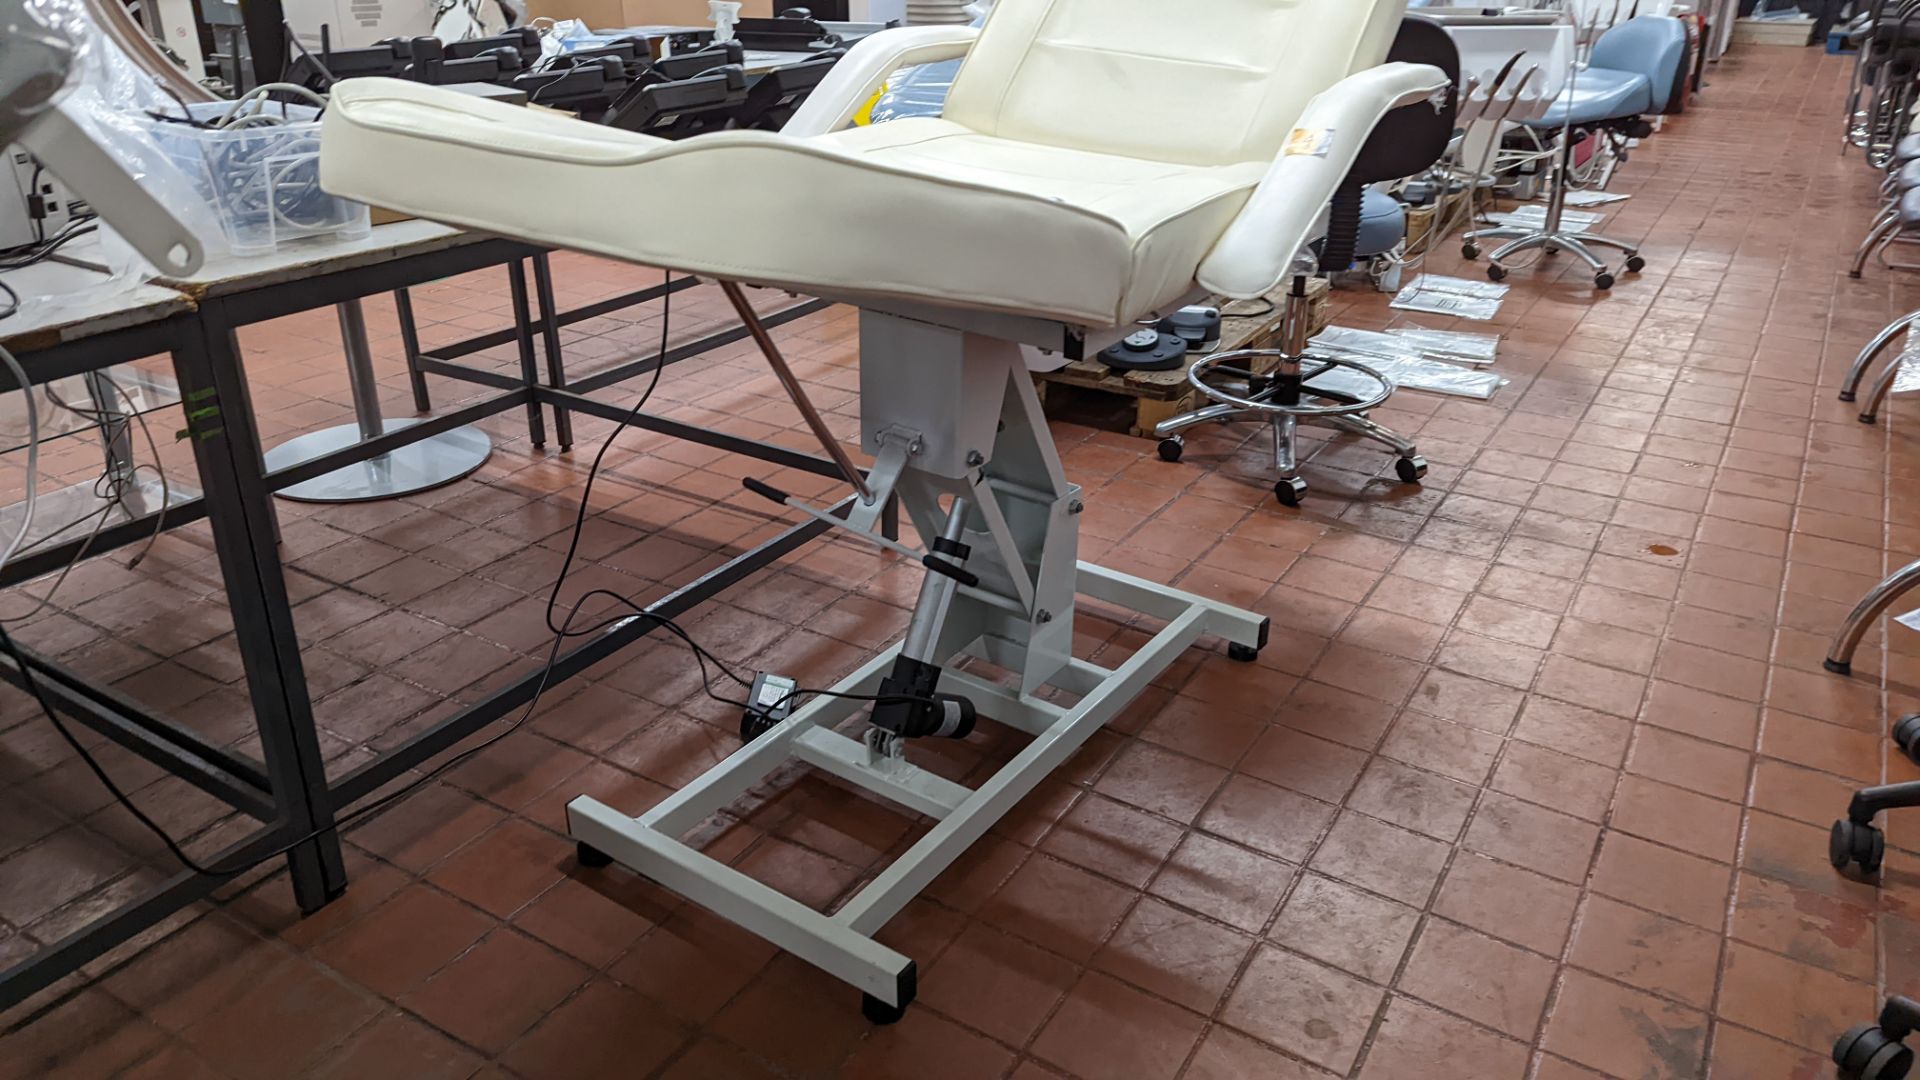 Electrically adjustable patient bed with hand-held controller - Image 4 of 9